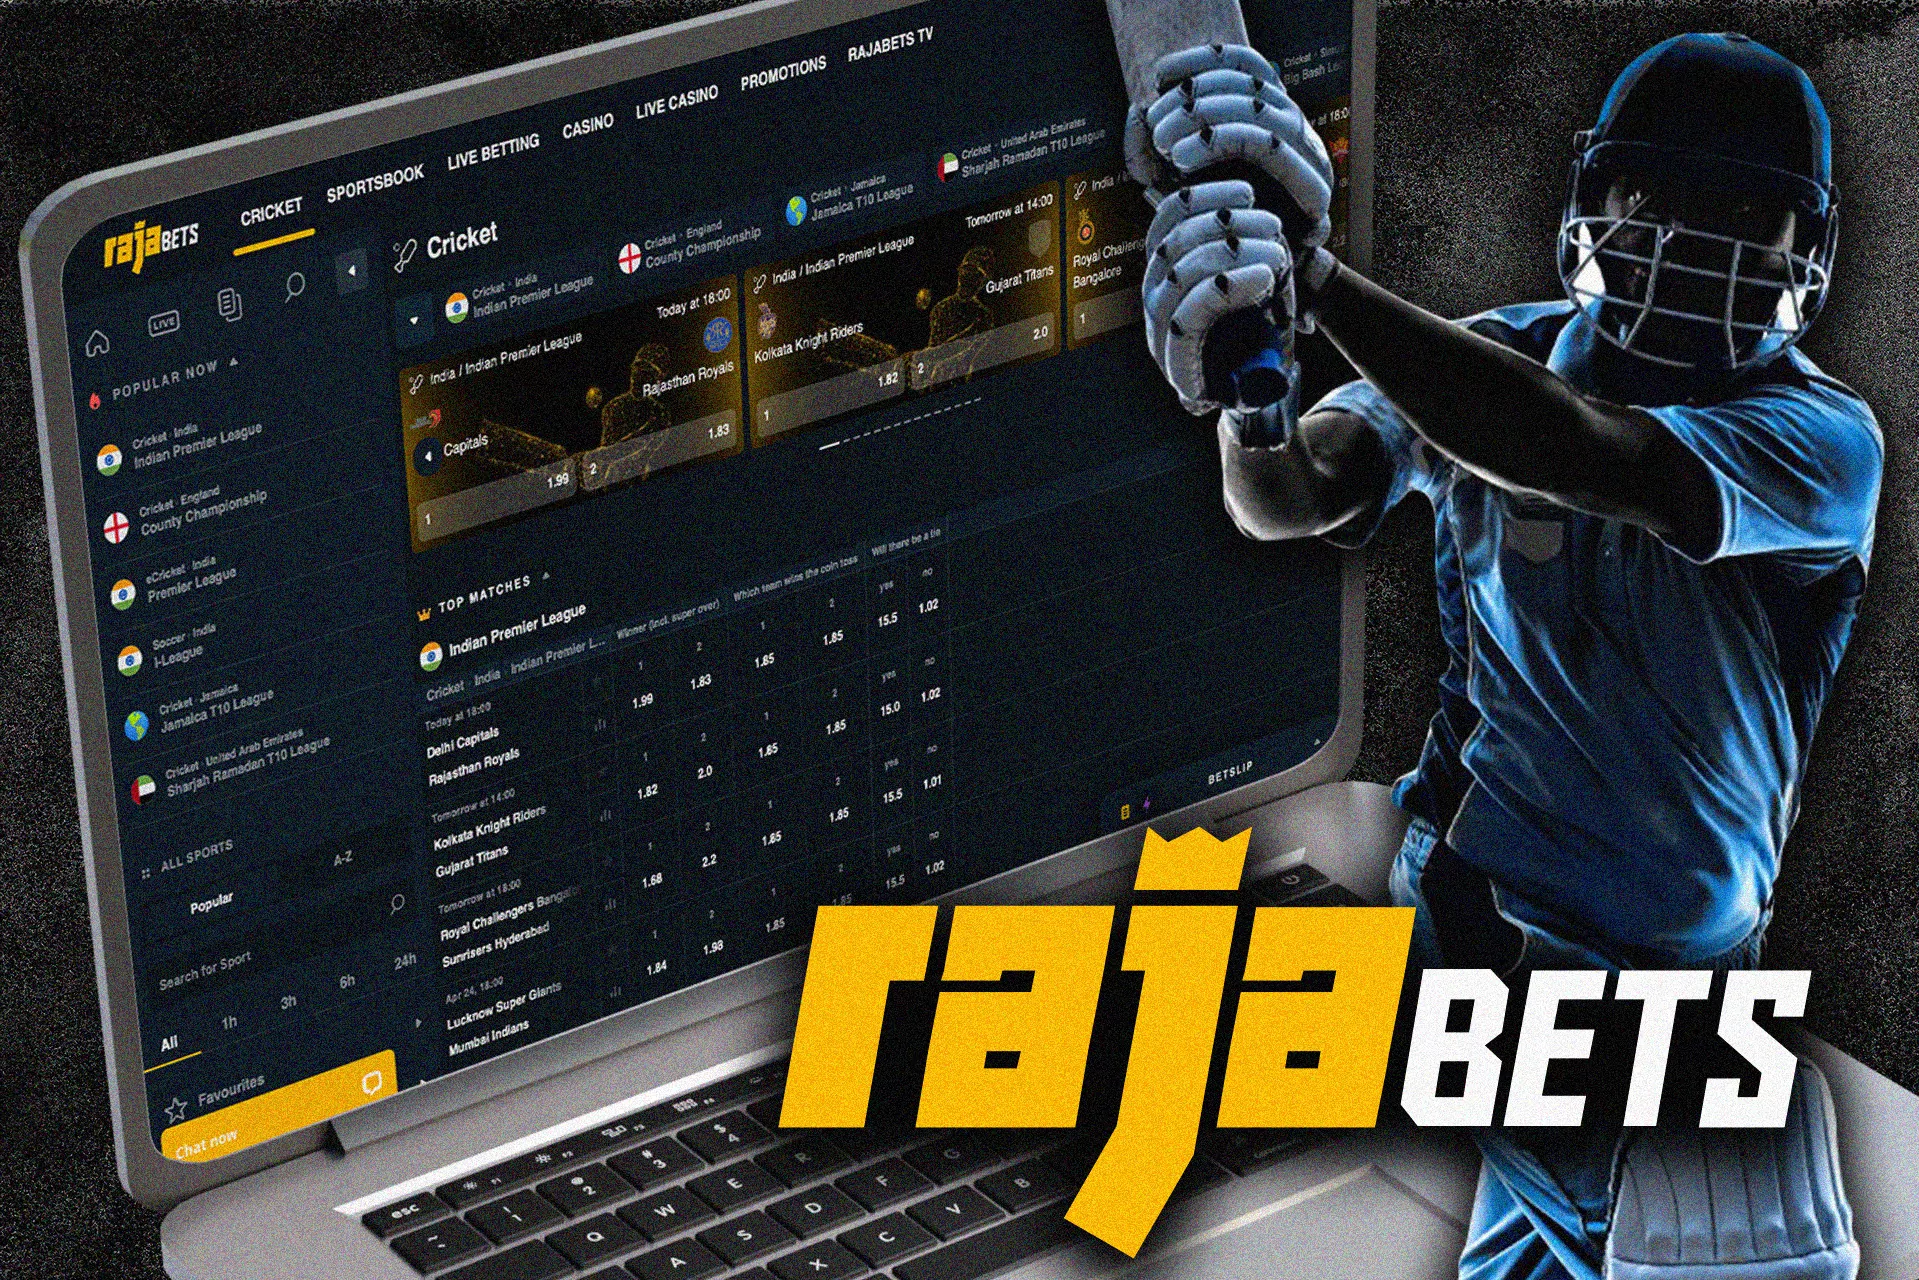 Rajabets official website for cricket betting.